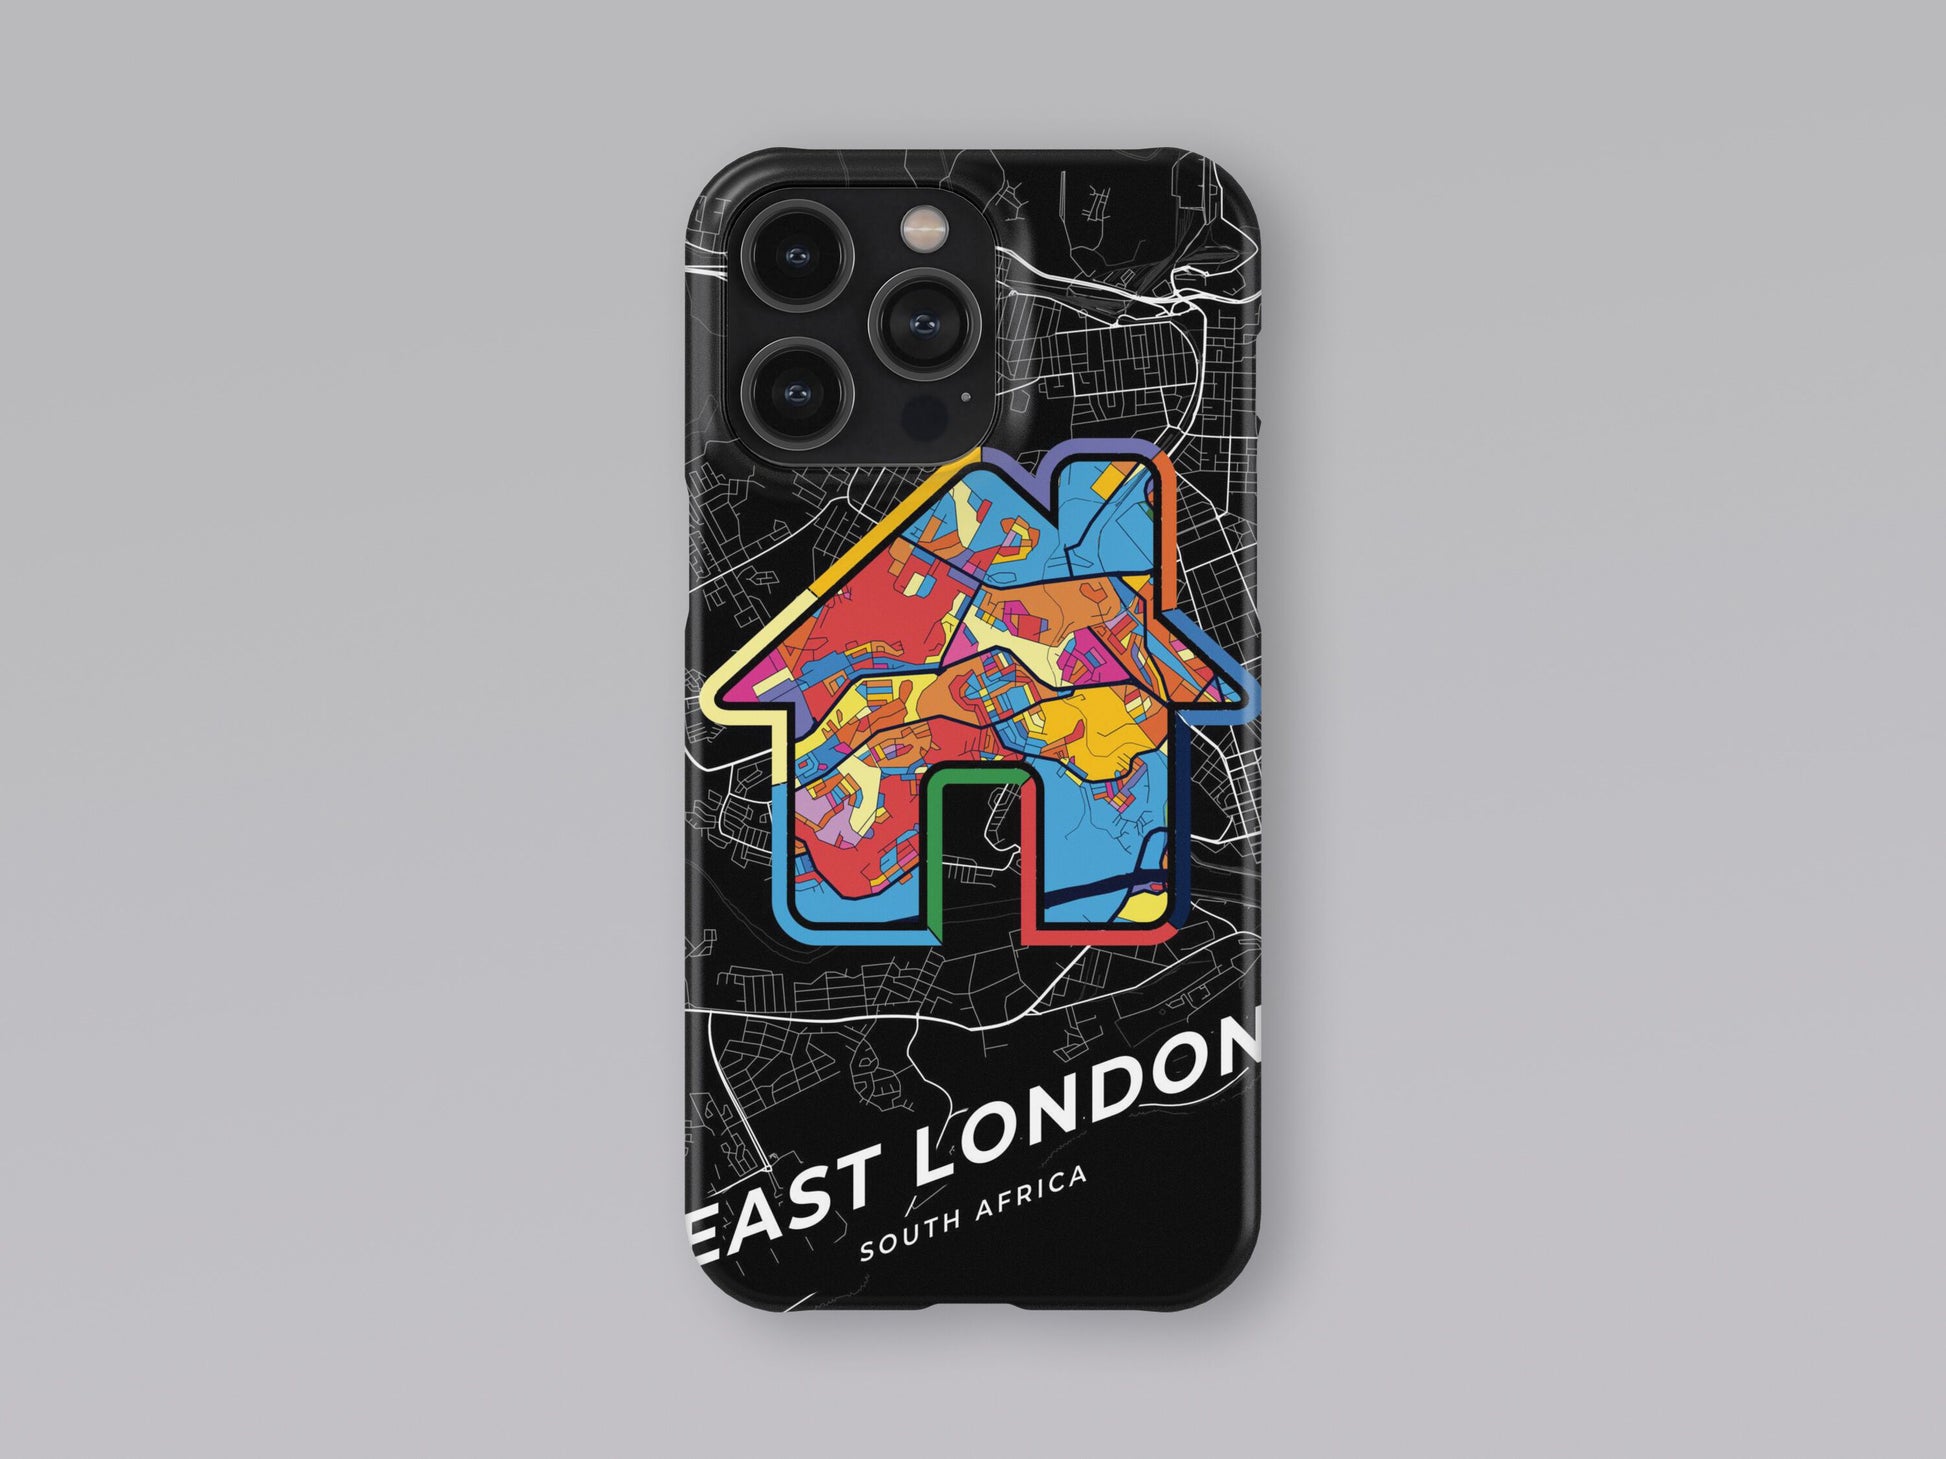 East London South Africa slim phone case with colorful icon. Birthday, wedding or housewarming gift. Couple match cases. 3